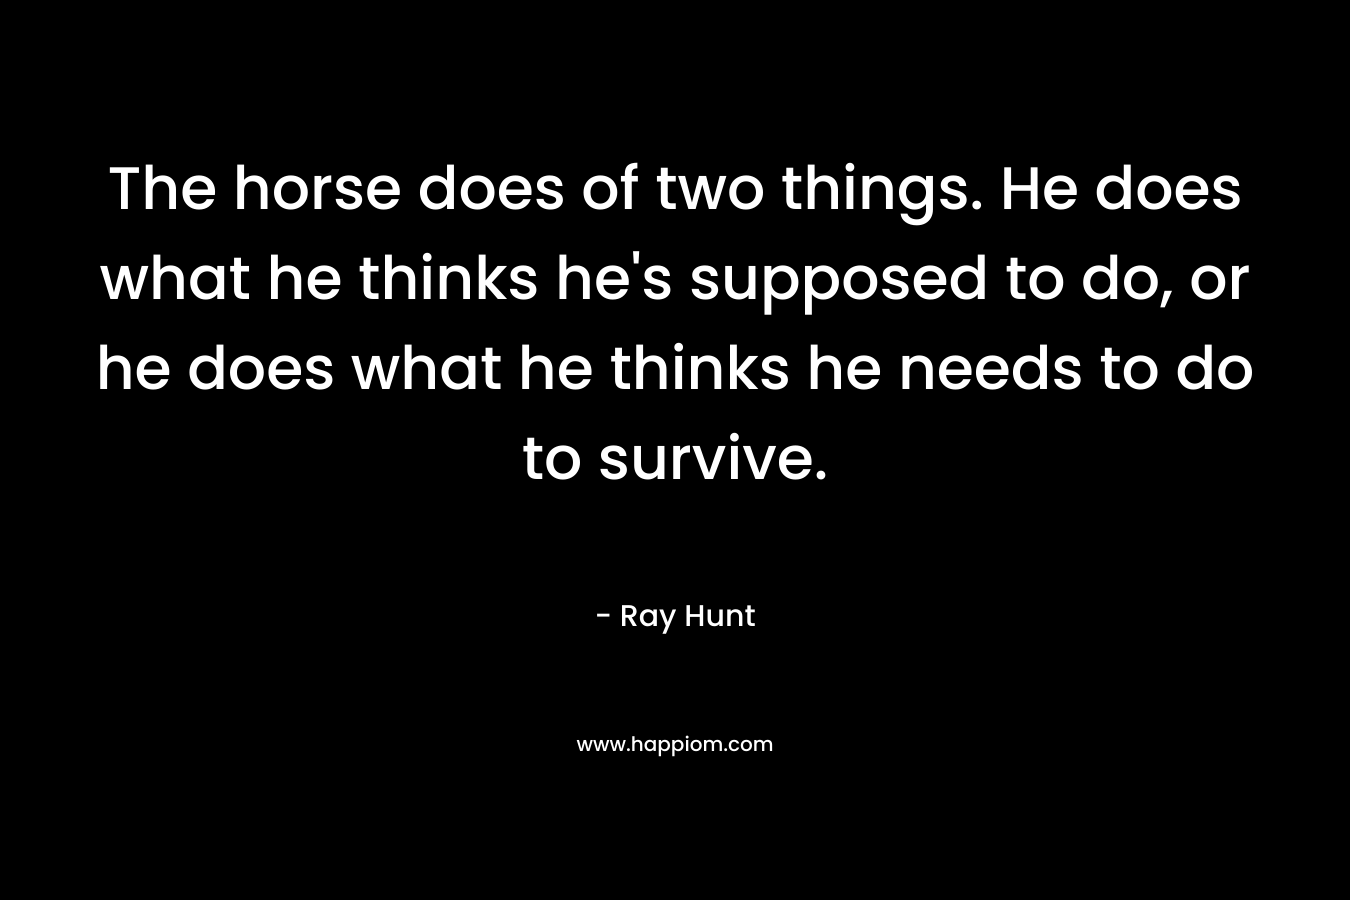 The horse does of two things. He does what he thinks he’s supposed to do, or he does what he thinks he needs to do to survive. – Ray Hunt